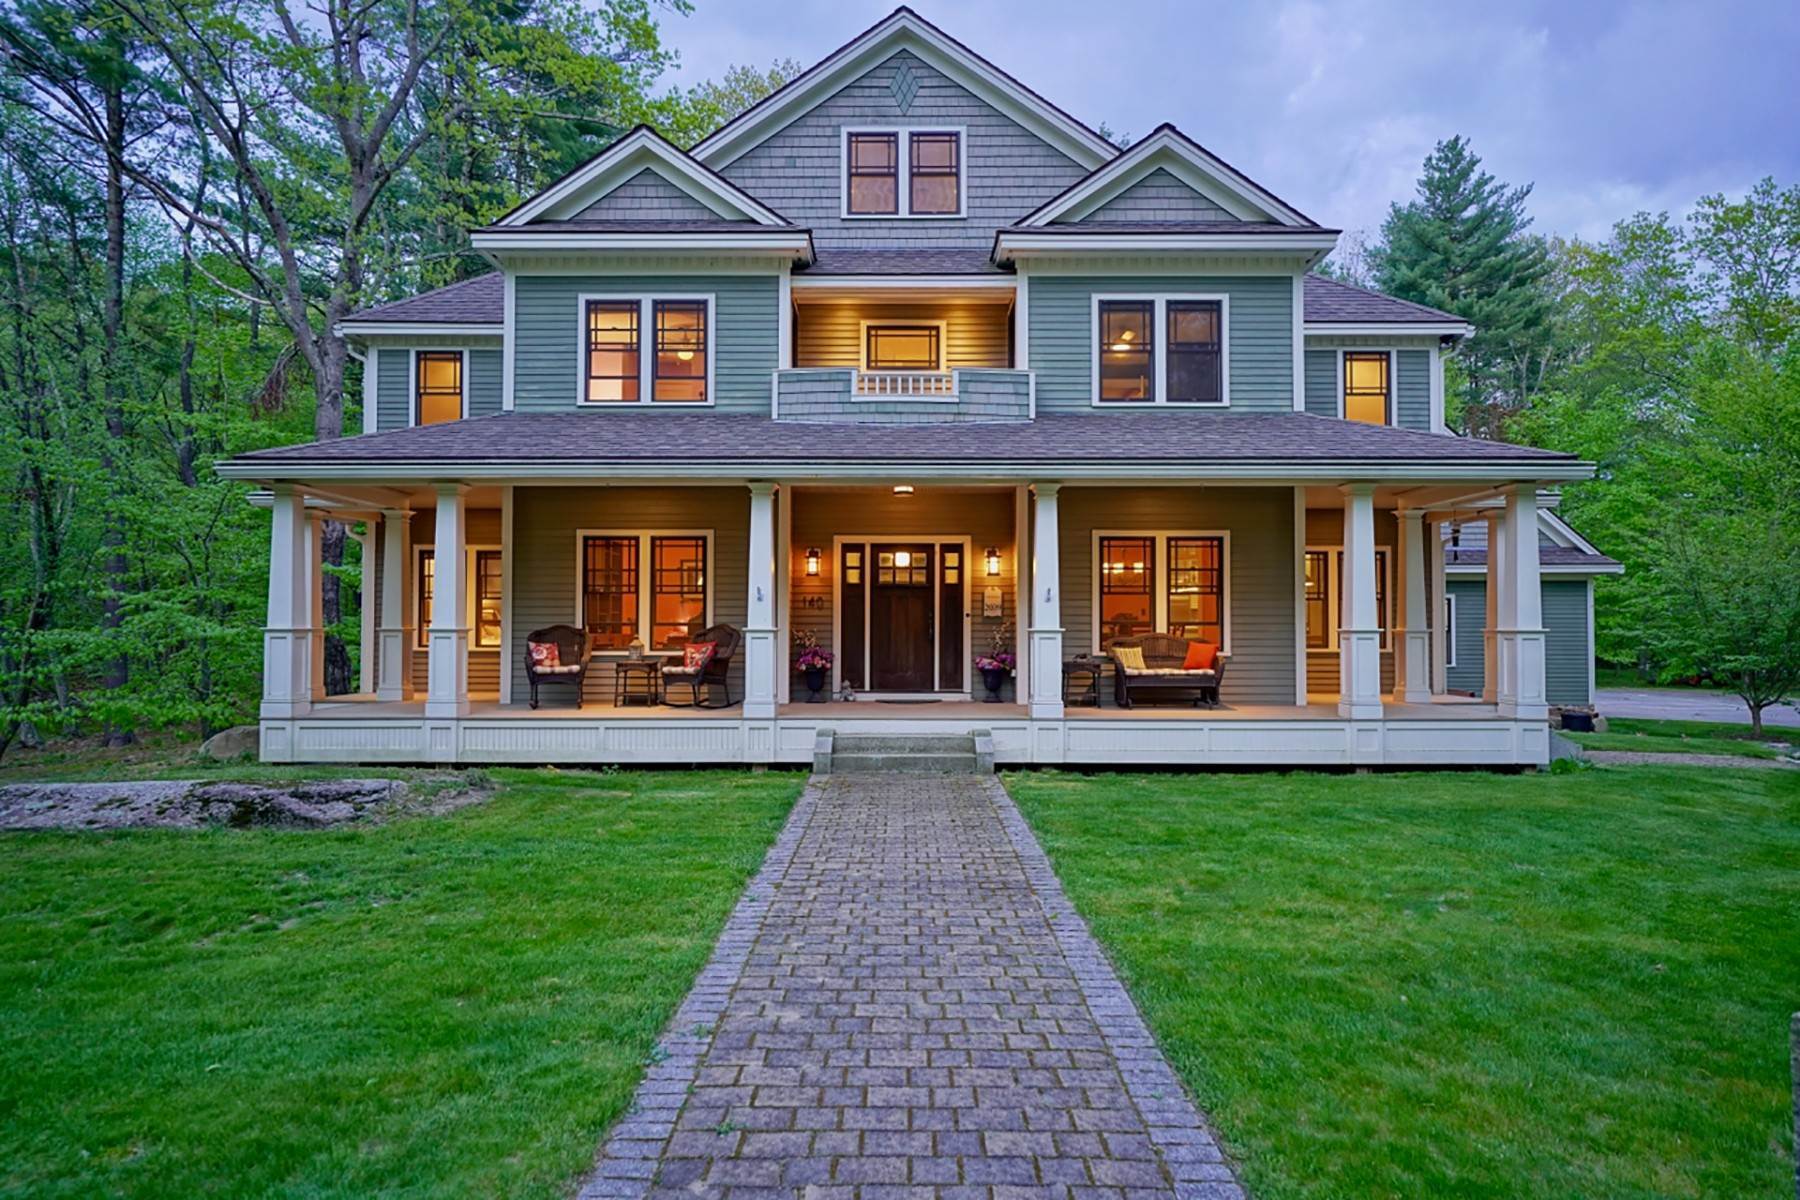 Single Family Homes for Sale at Luxury Craftsman-Style Home in the Heart of Rye 140 Fern Avenue, Rye, NH 03870